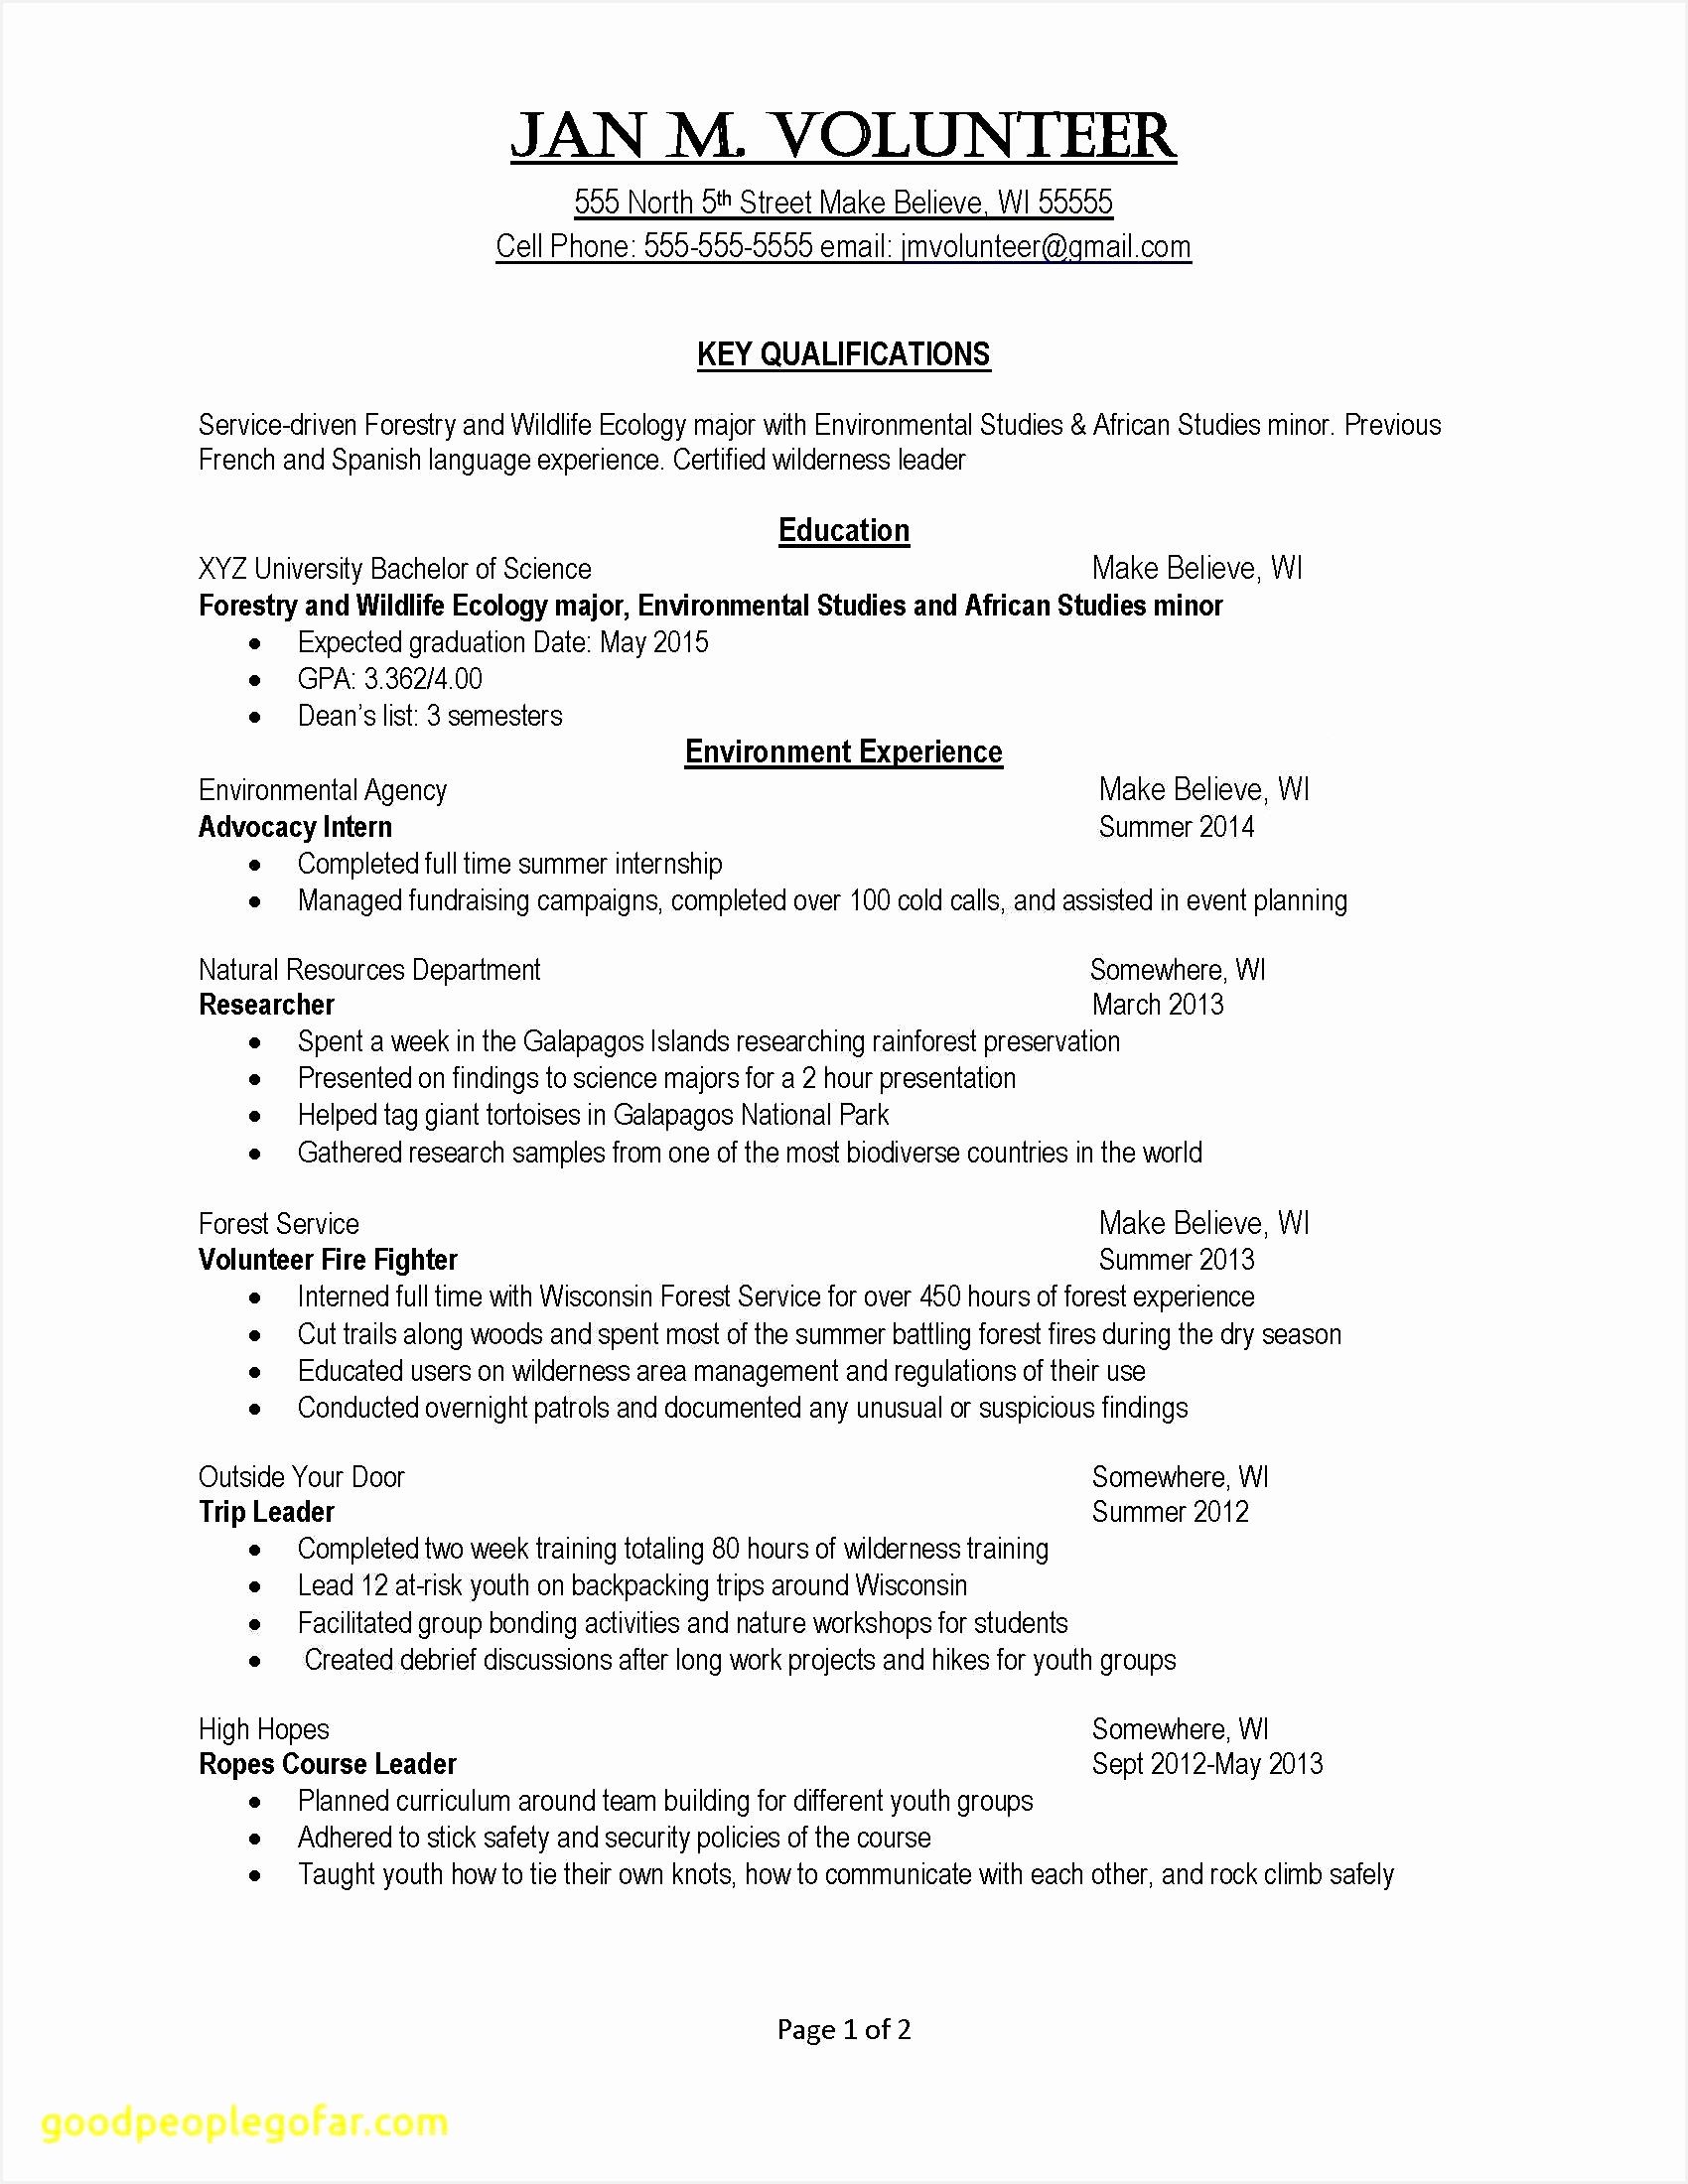 Fresh Examples Resumes Ecologist Resume 0d What Font Should A Resume22001700